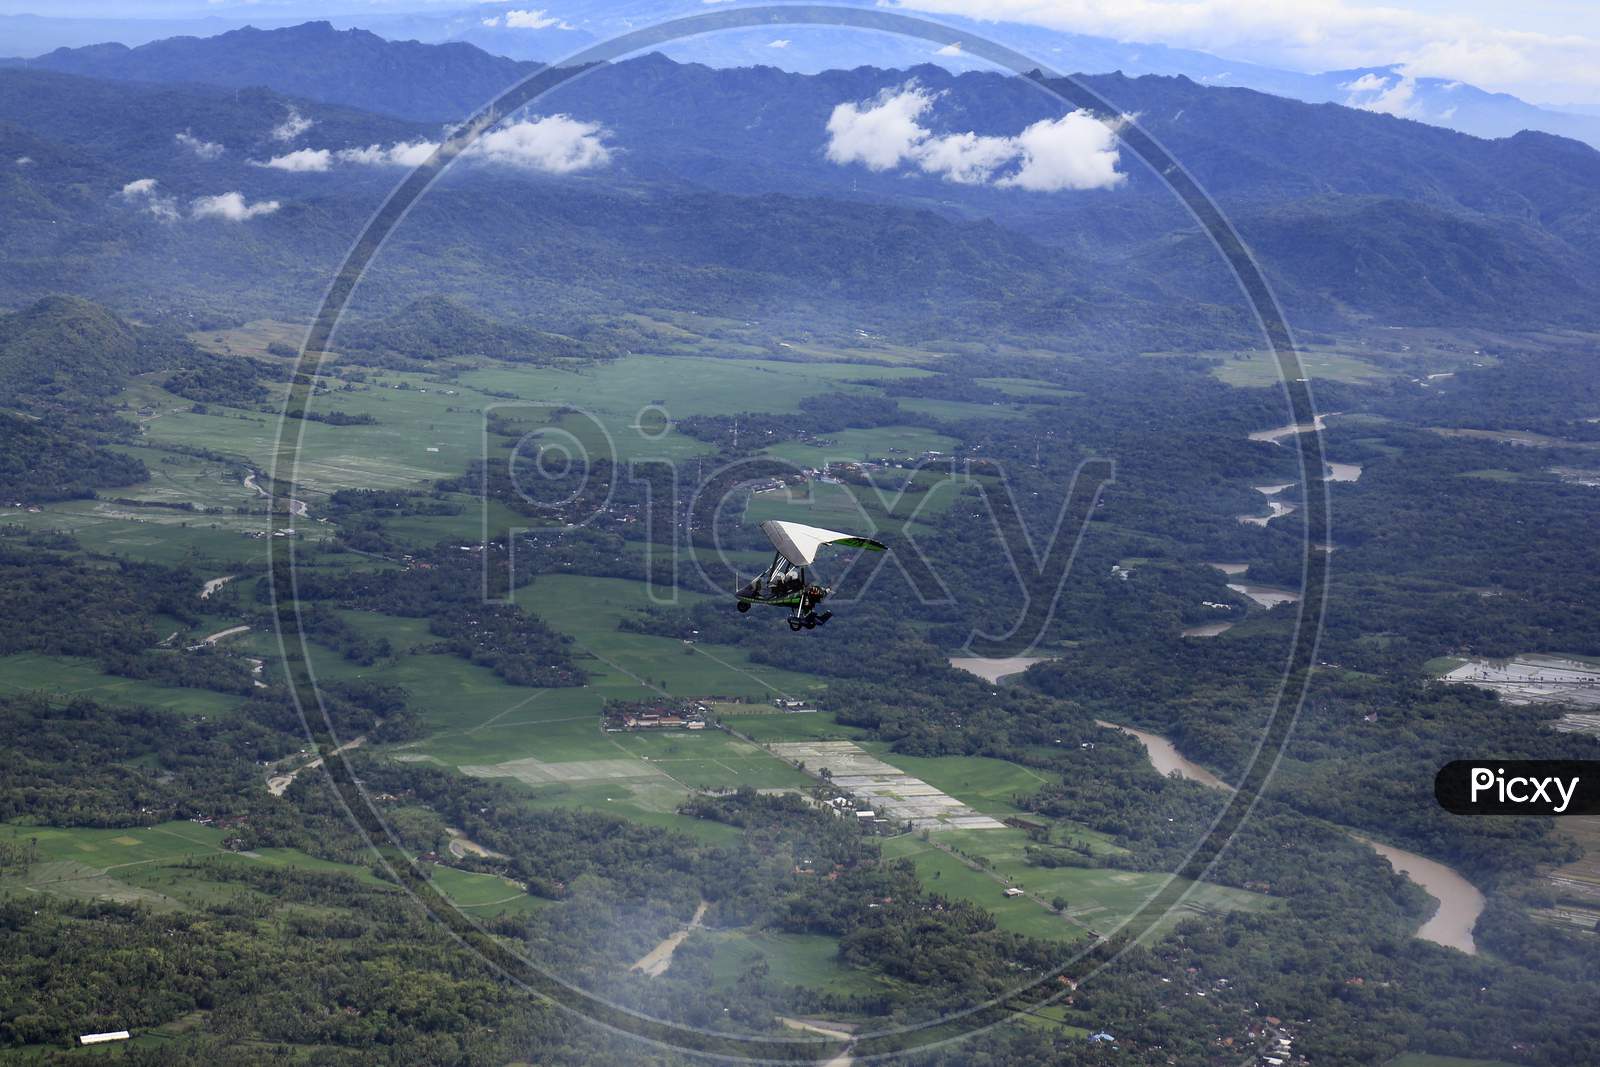 The Microlight trike passes over the green and the iconic river, Progo River